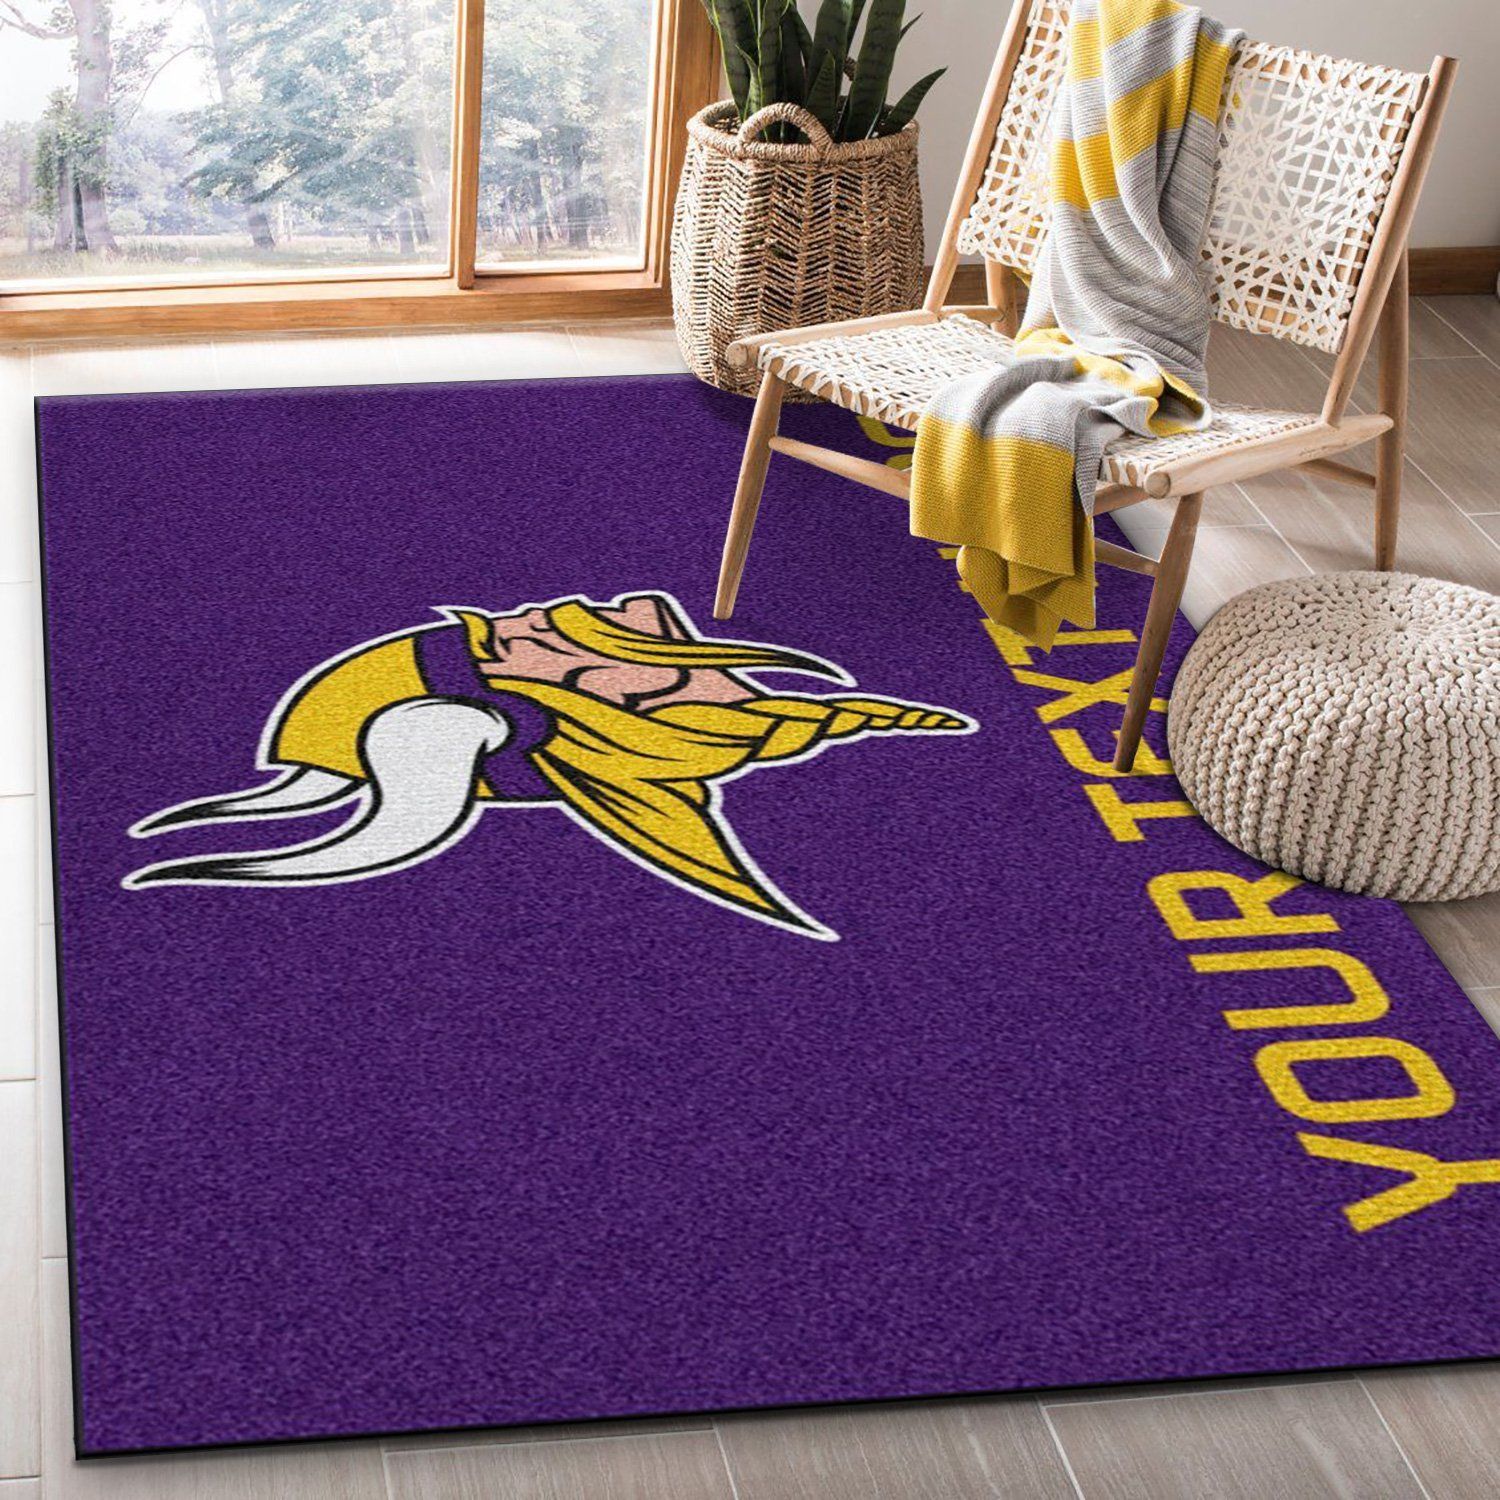 Customizable Minnesota Vikings Personalized Accent Rug NFL Area Rug